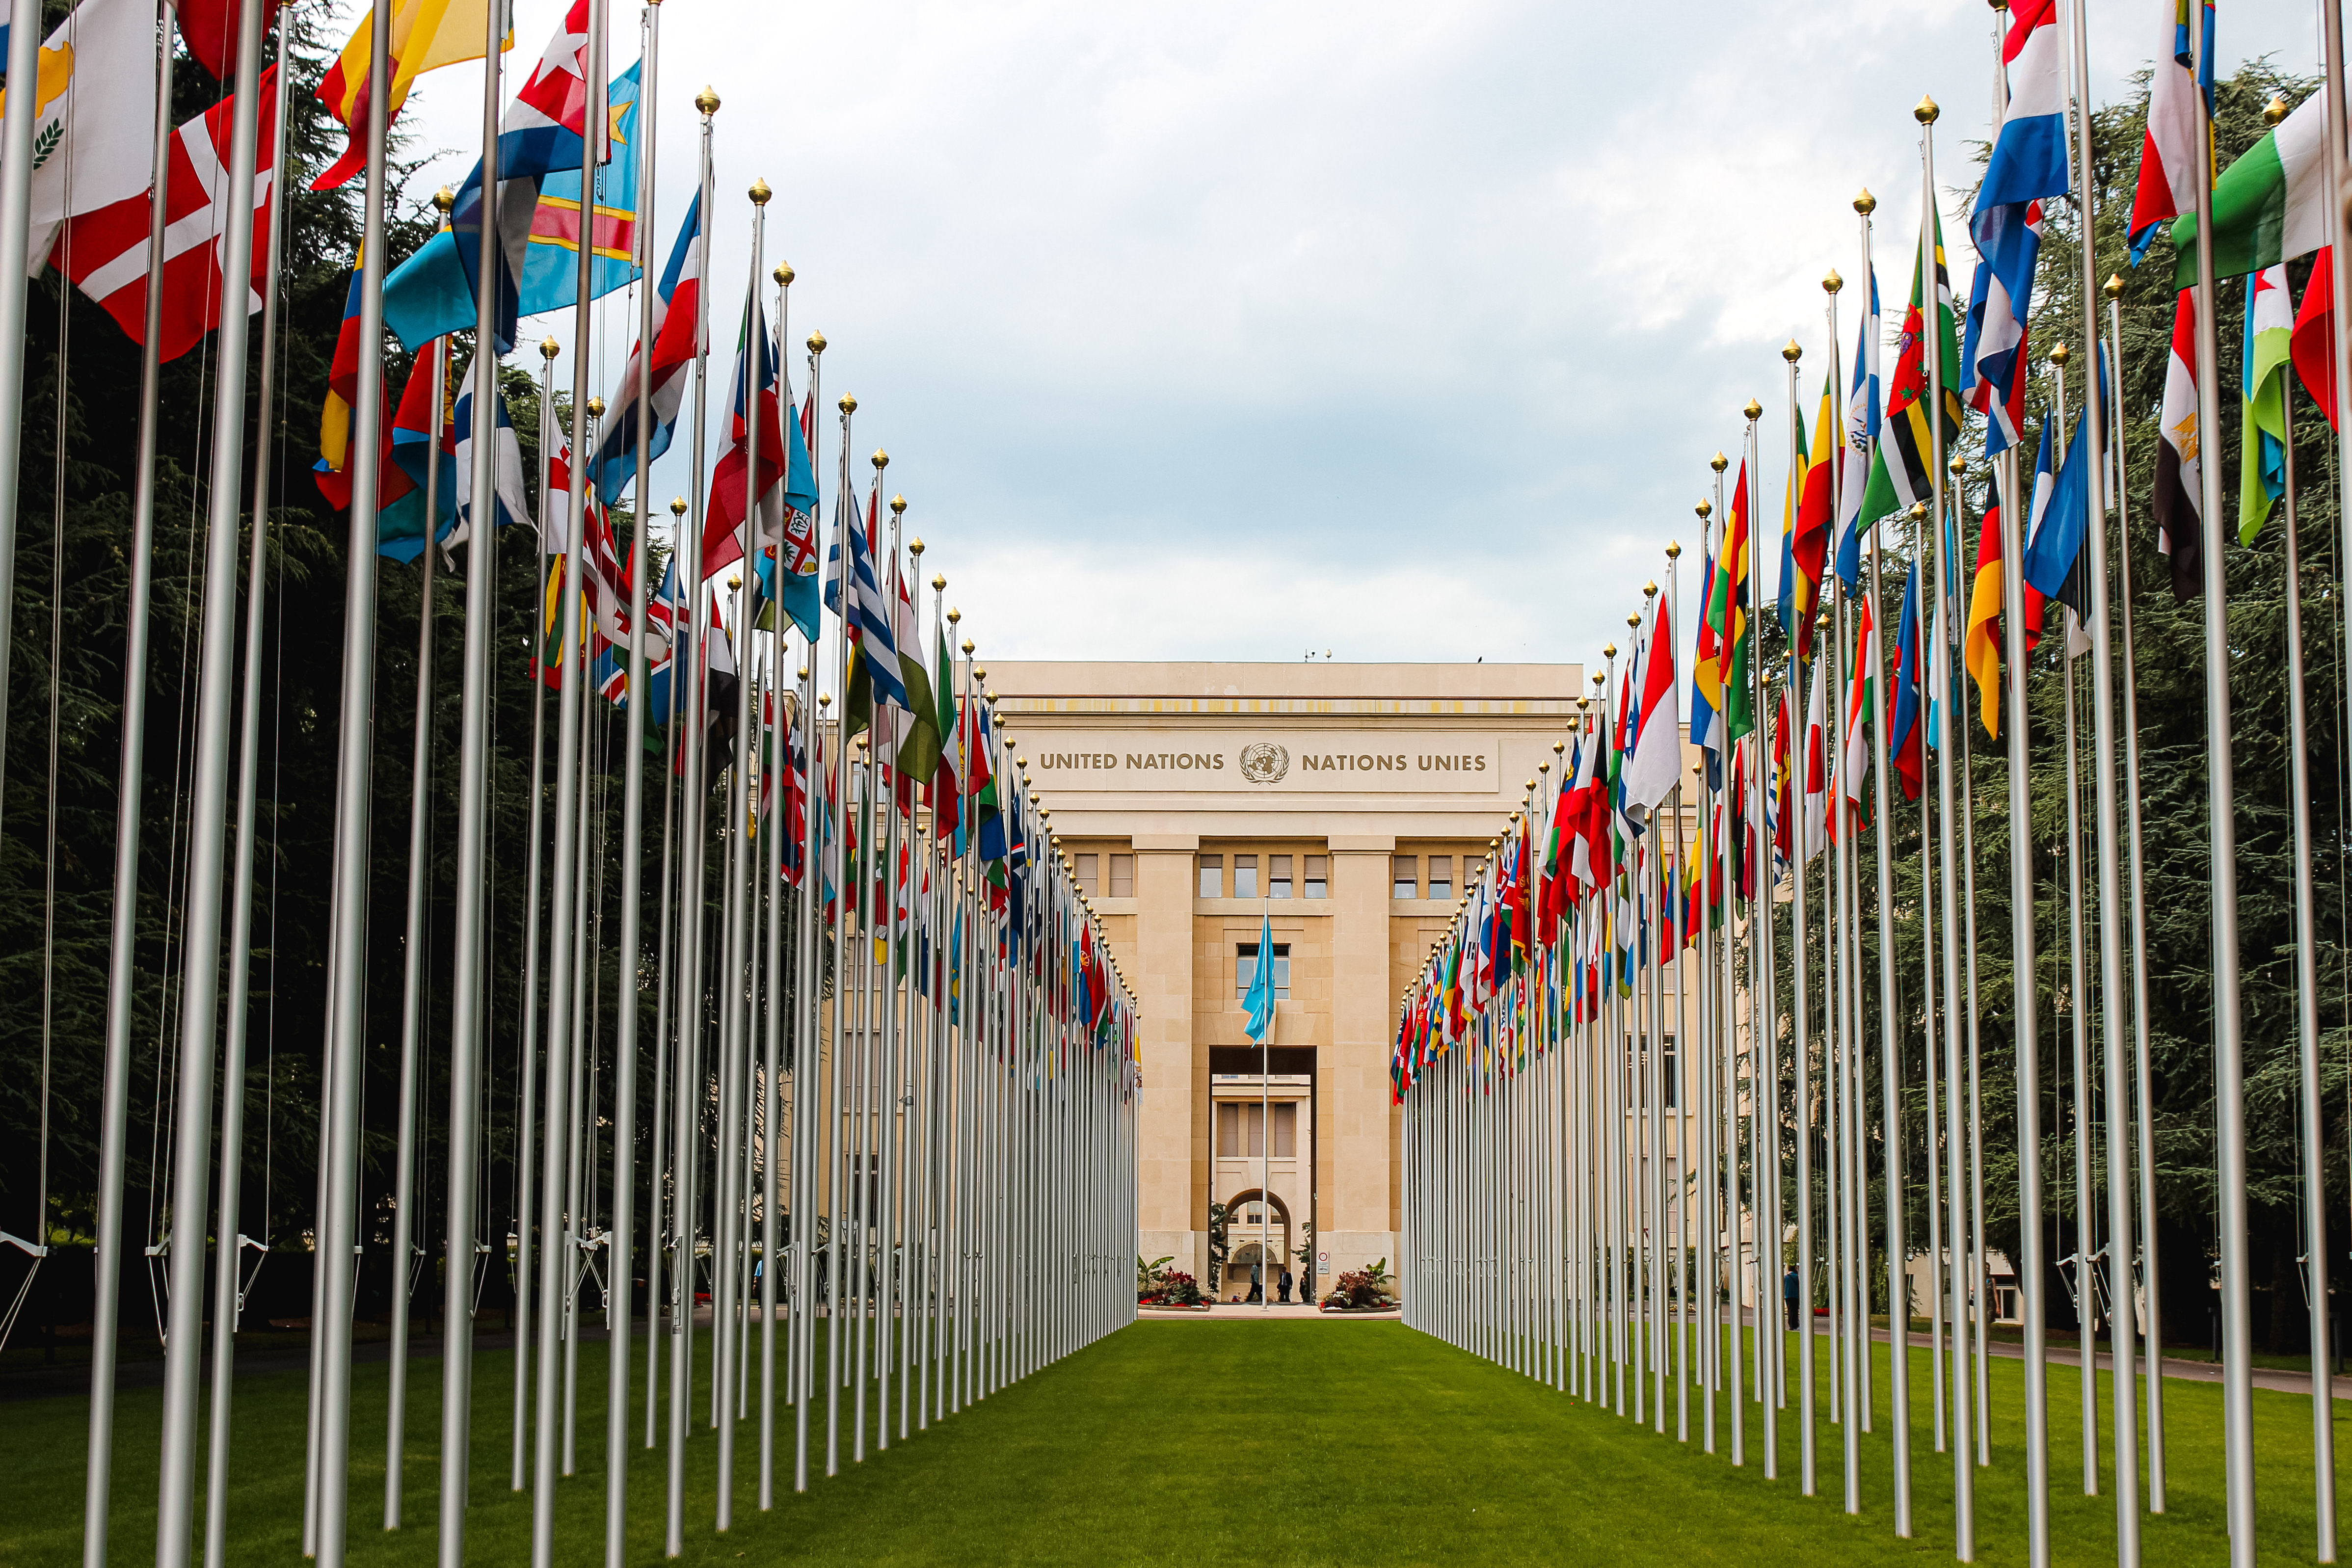 View of the United Nations Geneva building flanked by the flags of the countries belonging to the United Nations